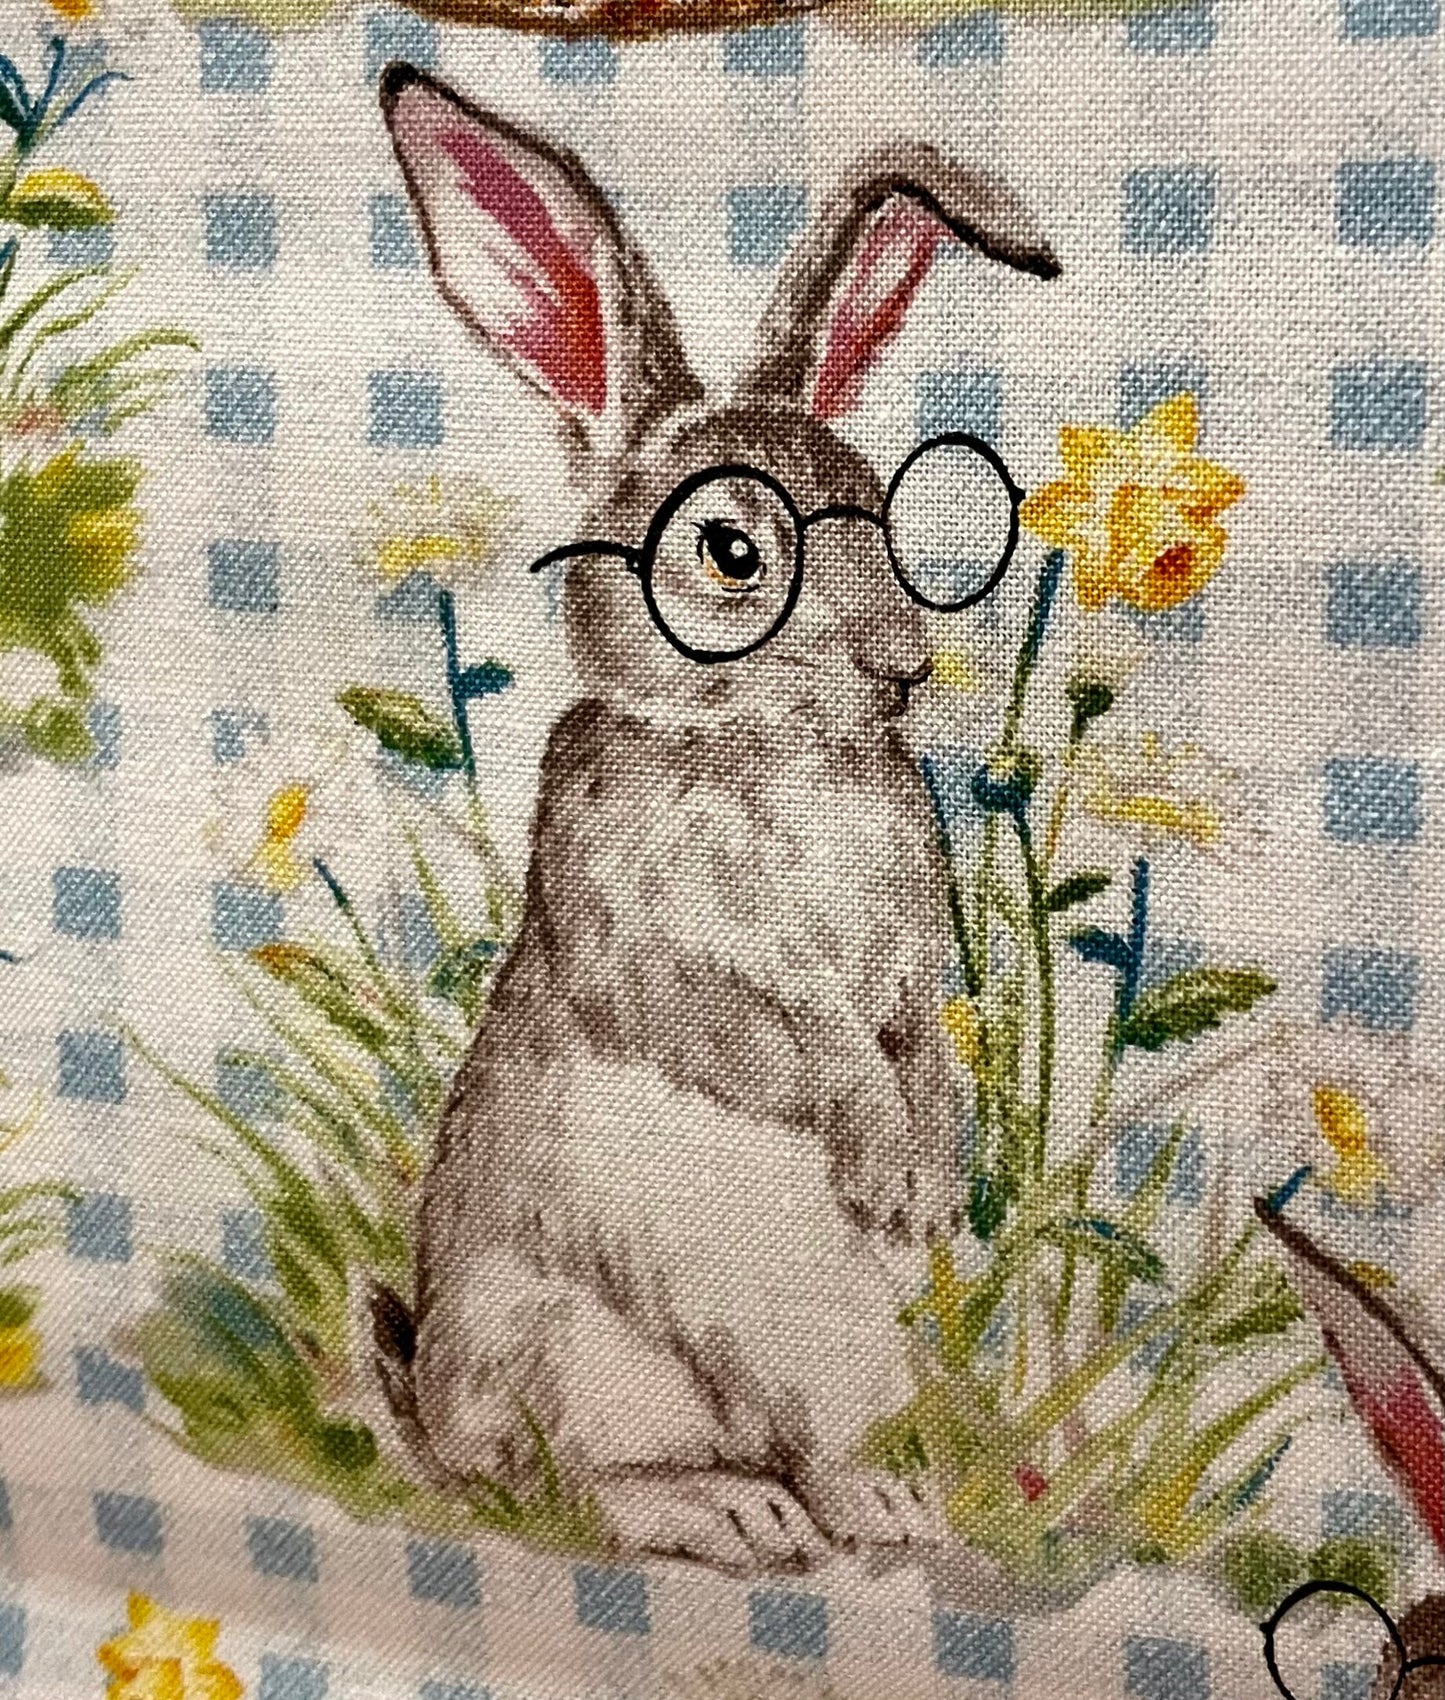 Beautiful designer Easter Bunny blanket and decor